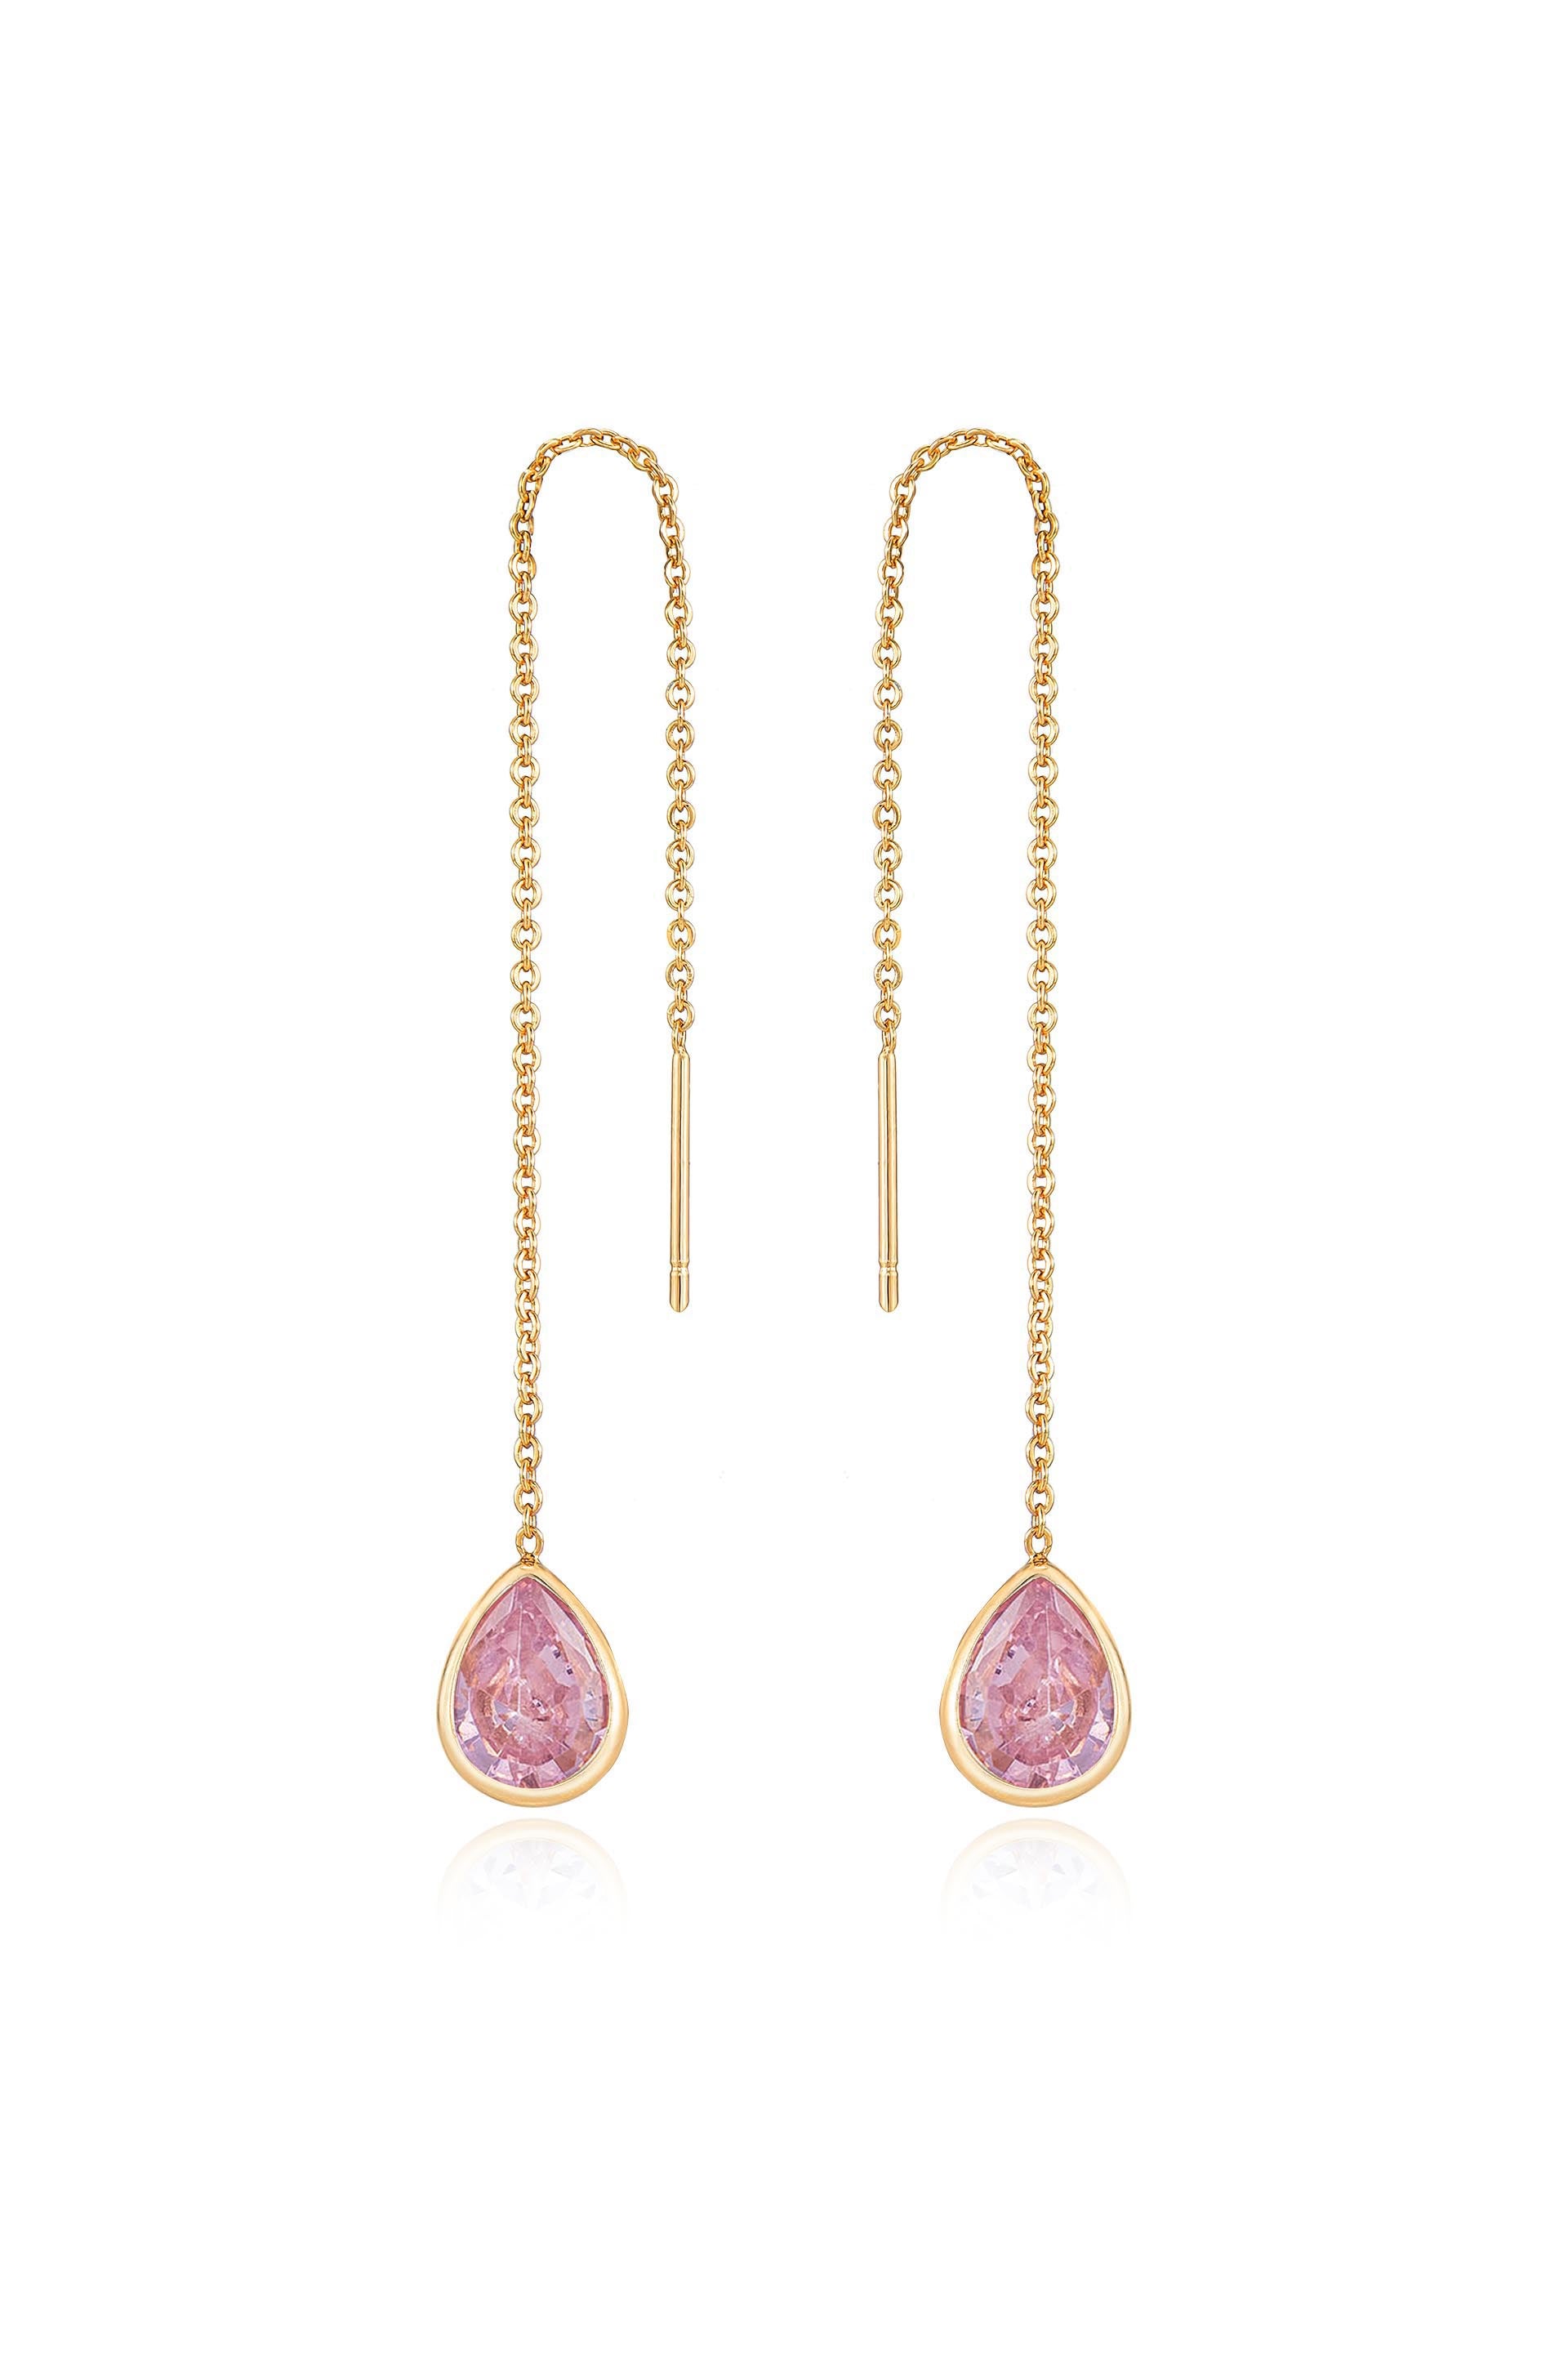 Barely There Chain and Crystal Dangle Earrings in pink